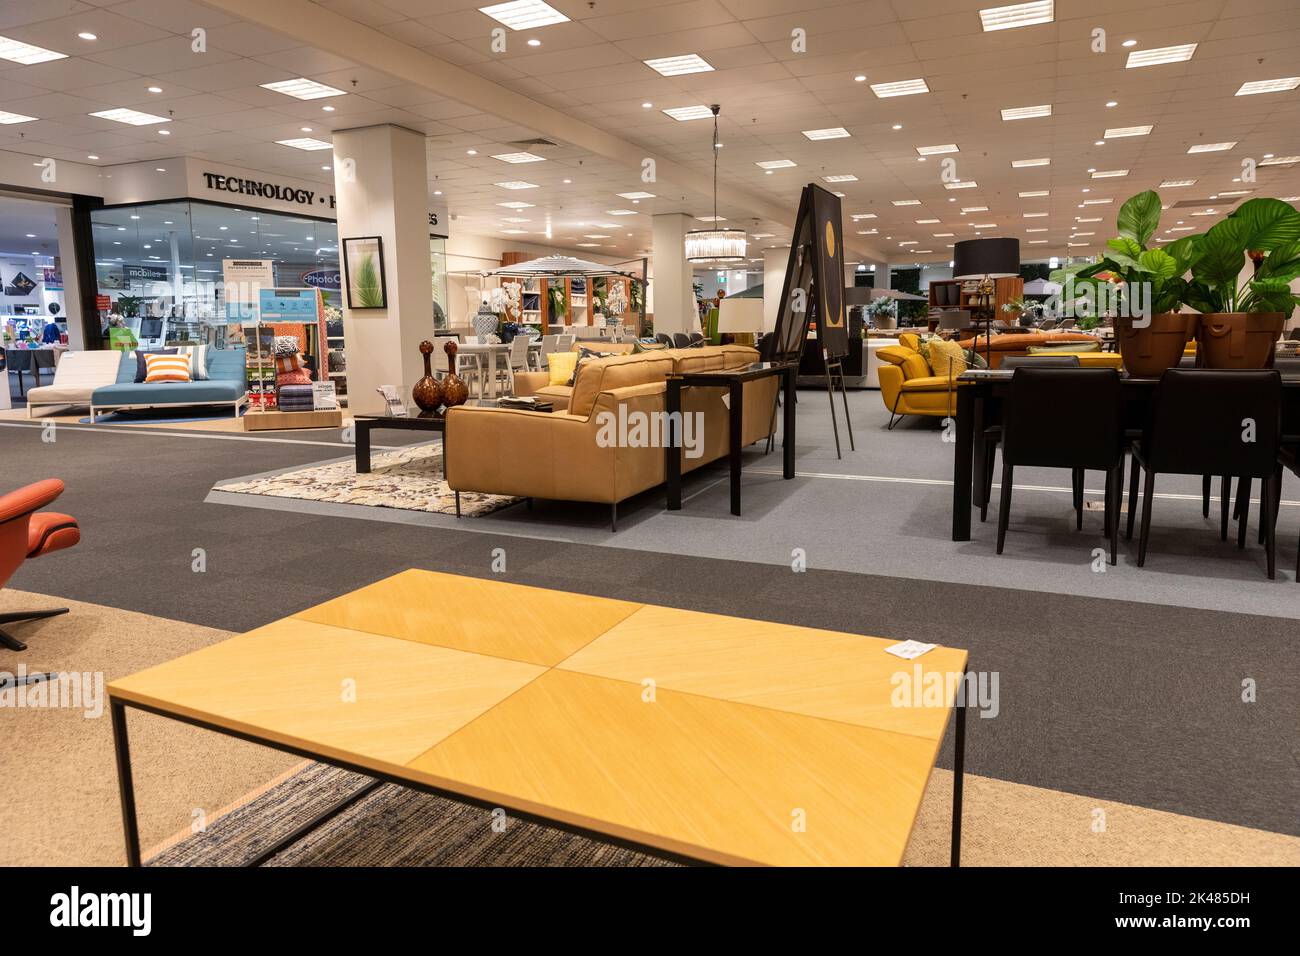 Furniture, sofas, tables and chairs for sale in a Harvey Norman store in Belrose,Sydney,NSW,Australia, 2022, interior shot Stock Photo